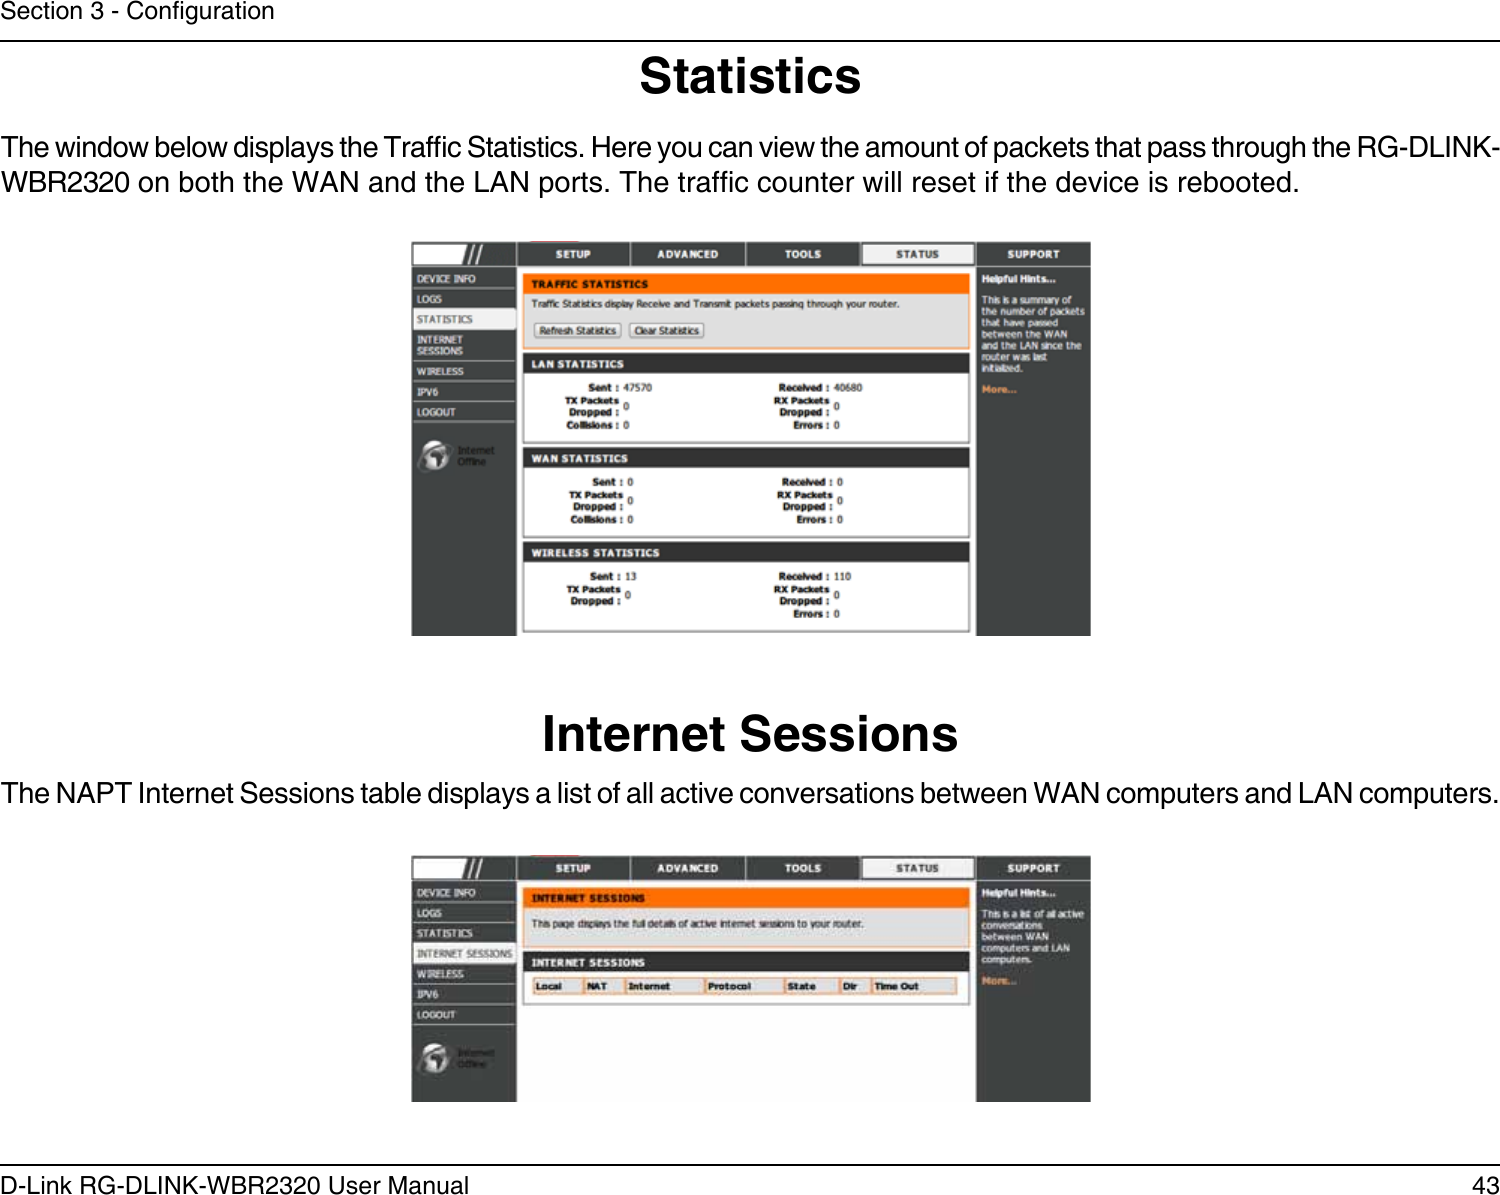 43D-Link RG-DLINK-WBR2320 User ManualSection 3 - CongurationStatisticsInternet SessionsThe window below displays the Trafc Statistics. Here you can view the amount of packets that pass through the RG-DLINK-WBR2320 on both the WAN and the LAN ports. The trafc counter will reset if the device is rebooted.The NAPT Internet Sessions table displays a list of all active conversations between WAN computers and LAN computers. 